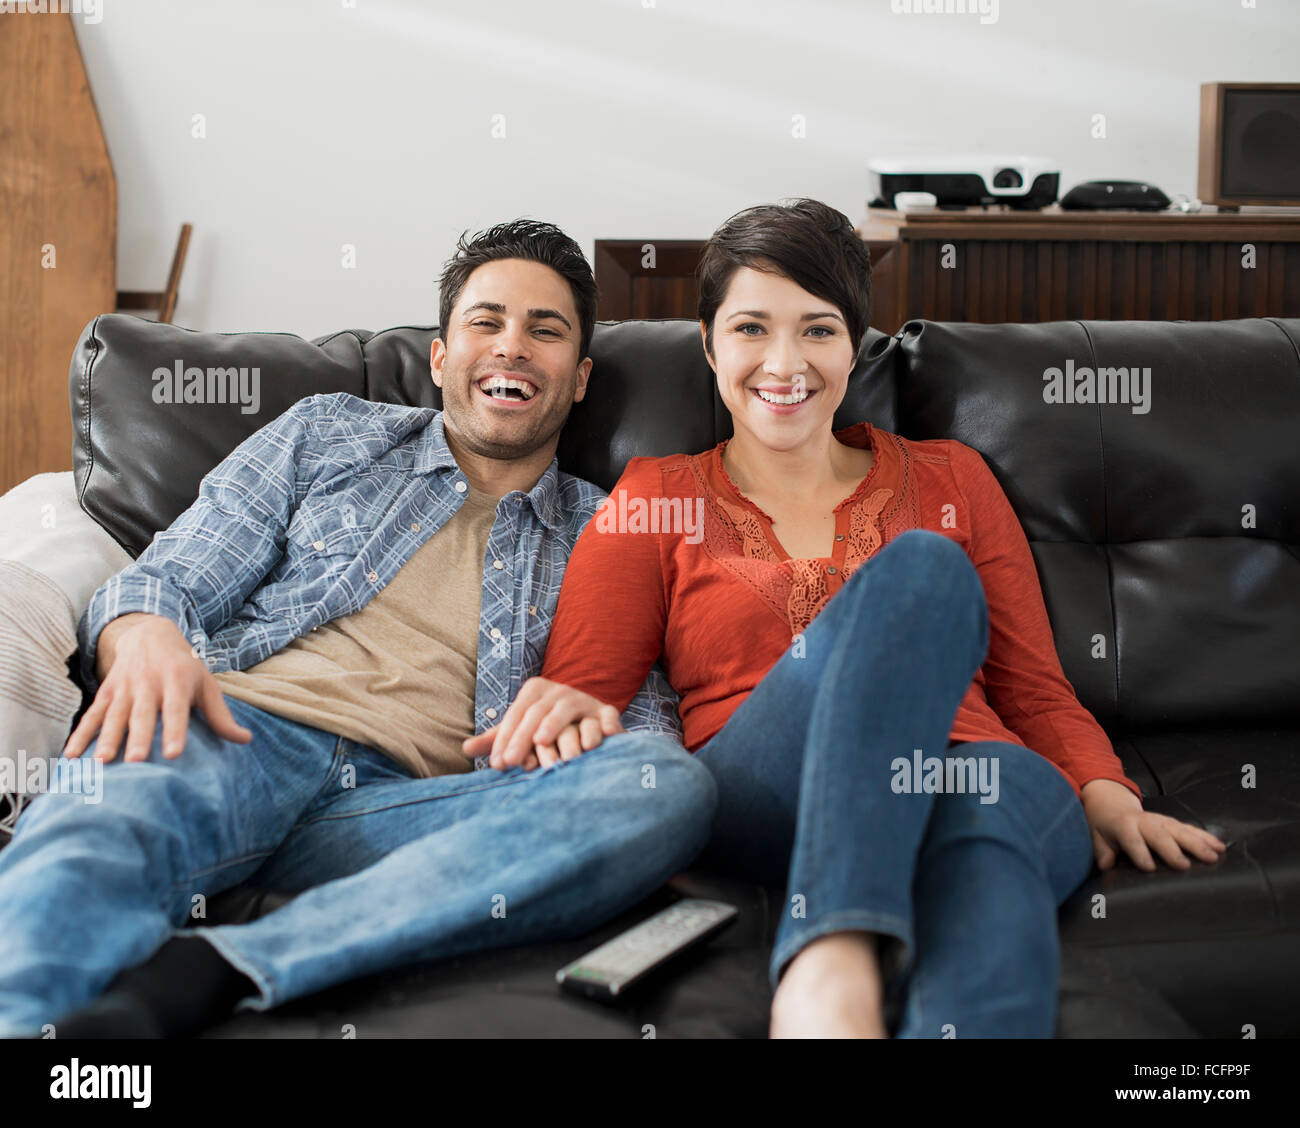 A man and woman sitting on a sofa, side by side, holding hands and watching a screen. Stock Photo